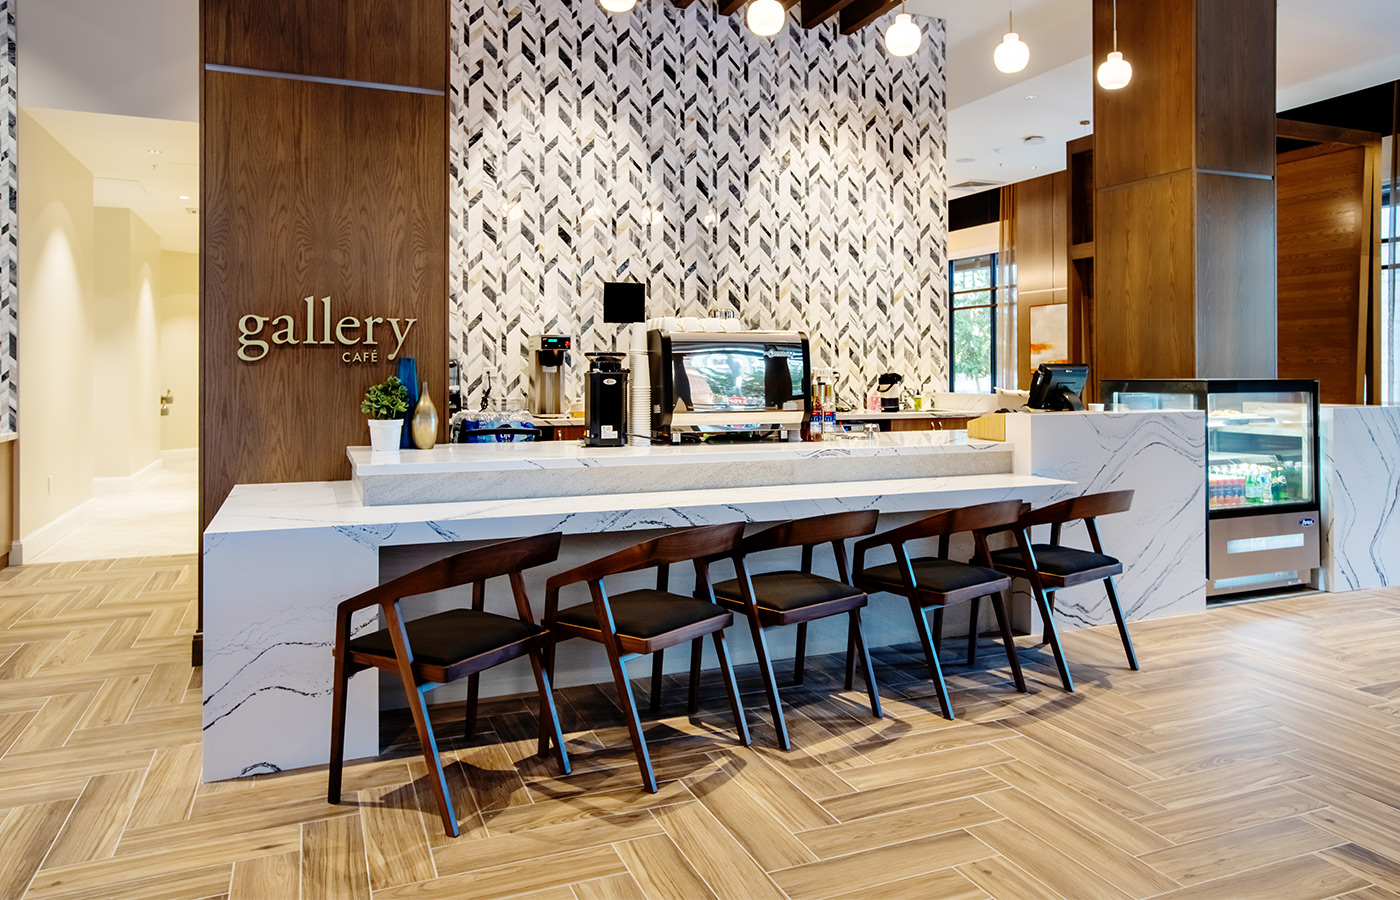 The gallery cafe with counter seating.